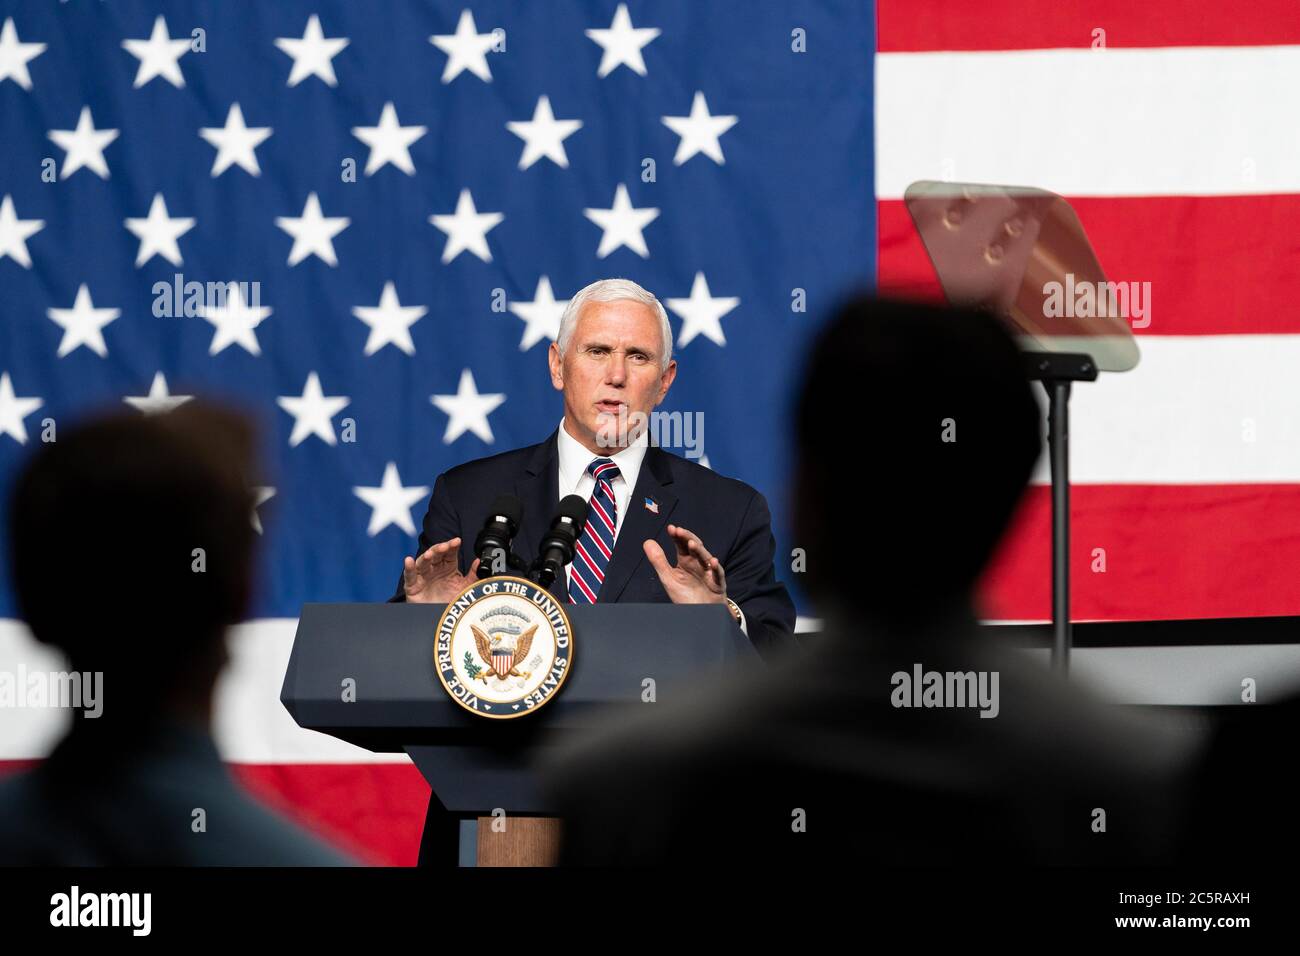 Vice President Mike Pence delivers remarks to employees and guests Thursday, June 25, 2020, at Lordstown Motors in Lordstown, Ohio. (USA) Stock Photo